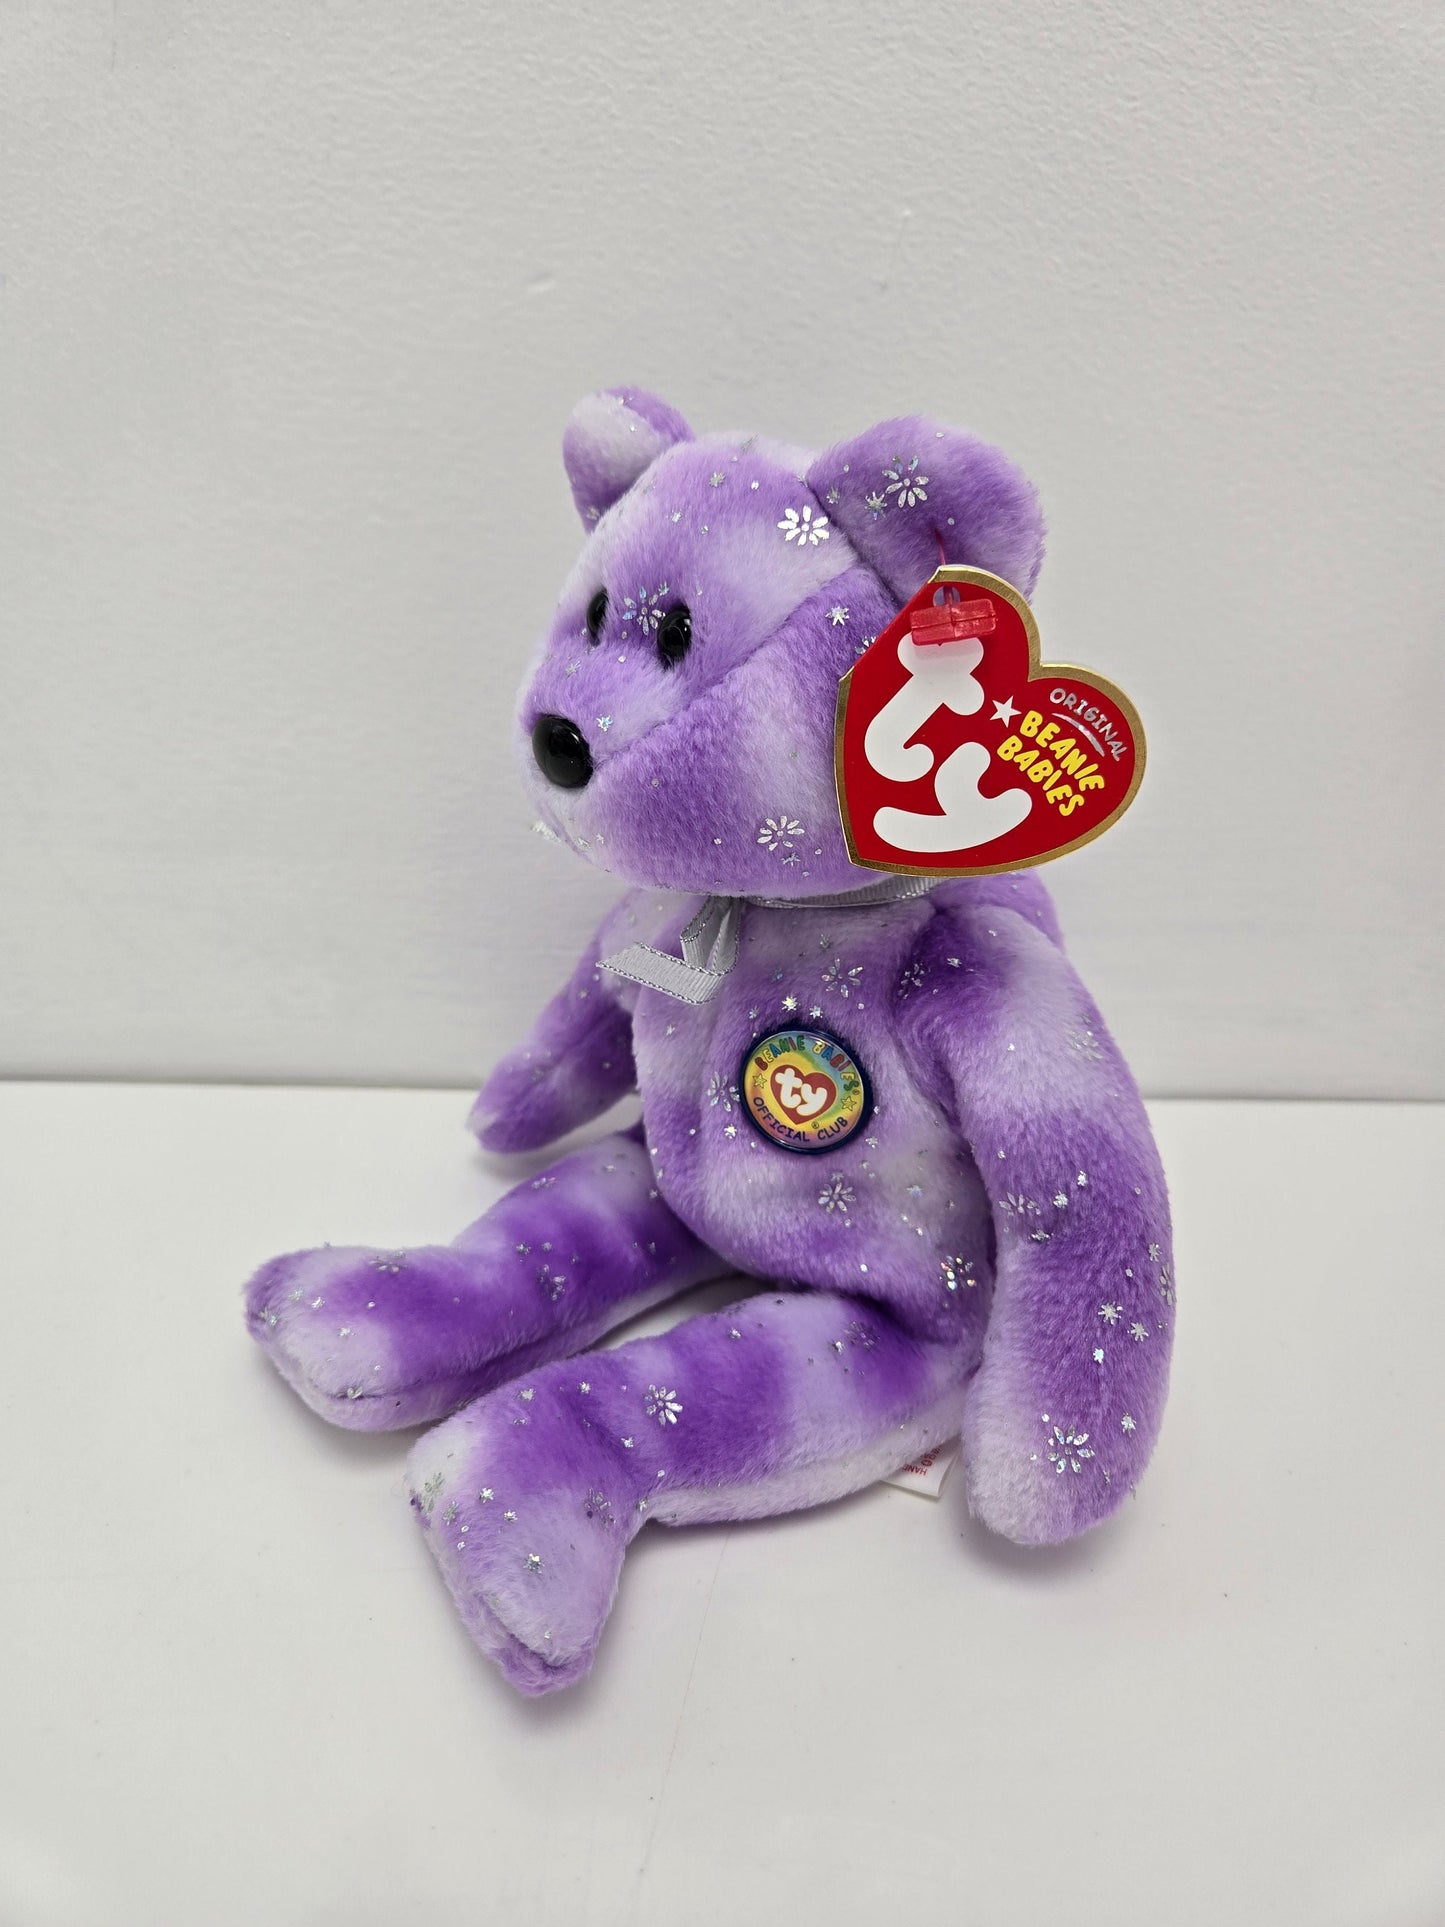 TY Beanie Baby “Clubby 8” the Bear - Internet Exclusive *Rare* (8.5 inch)